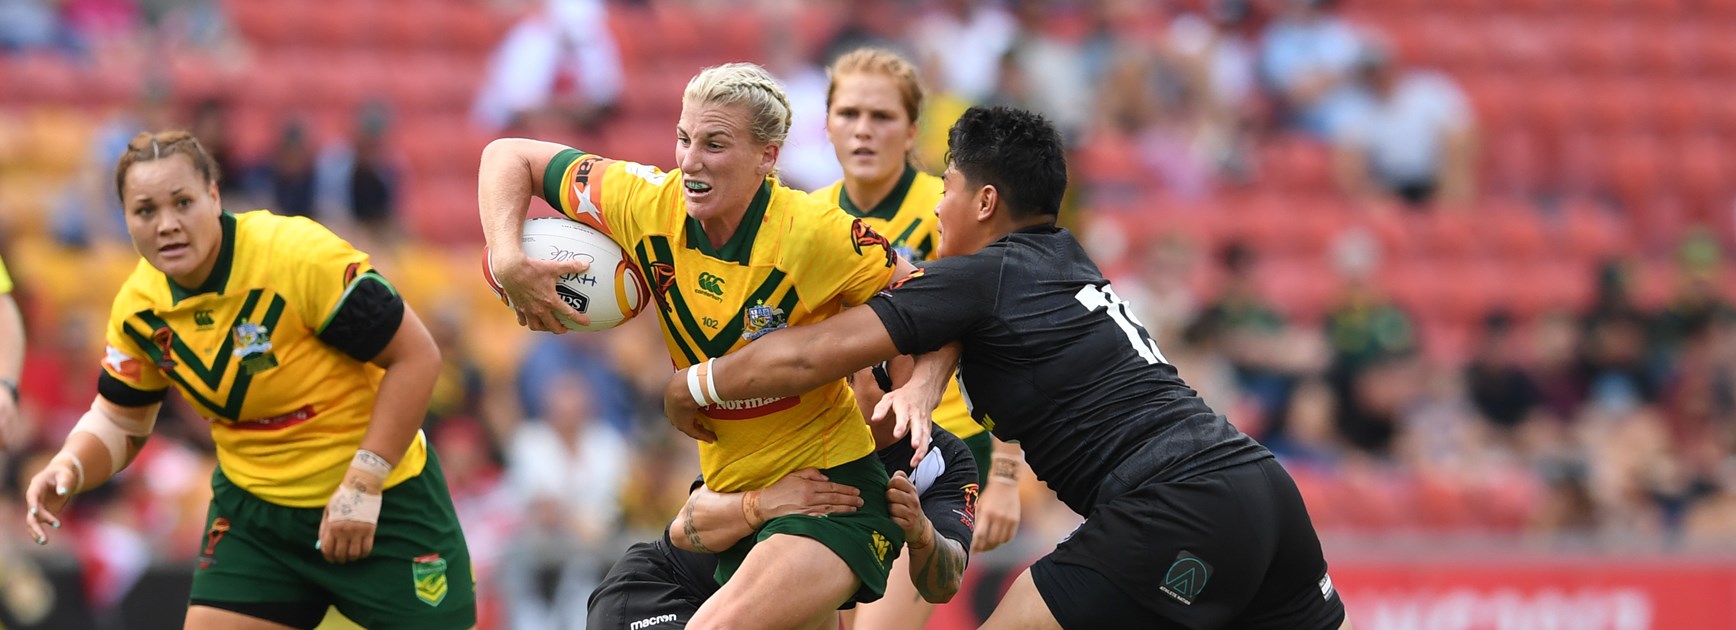 Downer Rugby League World Cup 9s Sydney 2019 nations confirmed